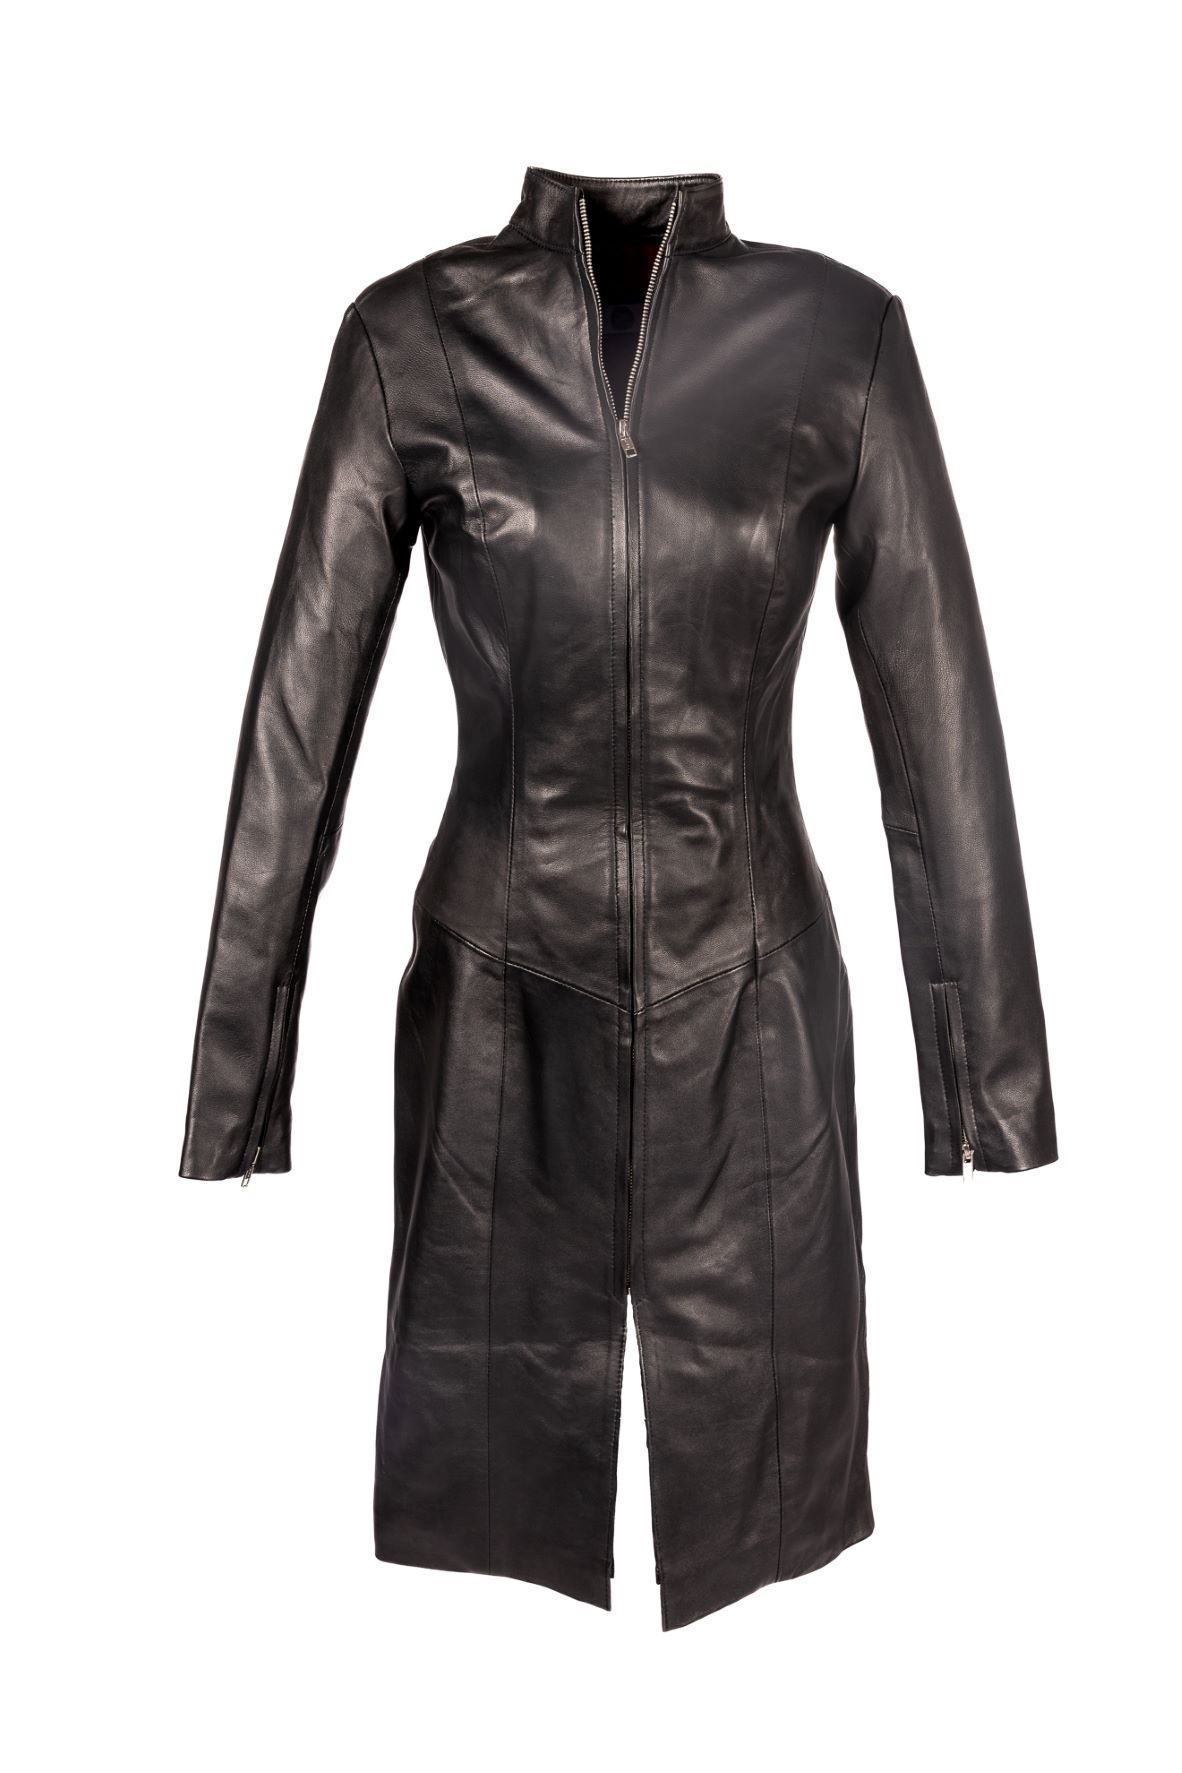 Leather Coat Leather Dress in GENUINE LEATHER with Zipper